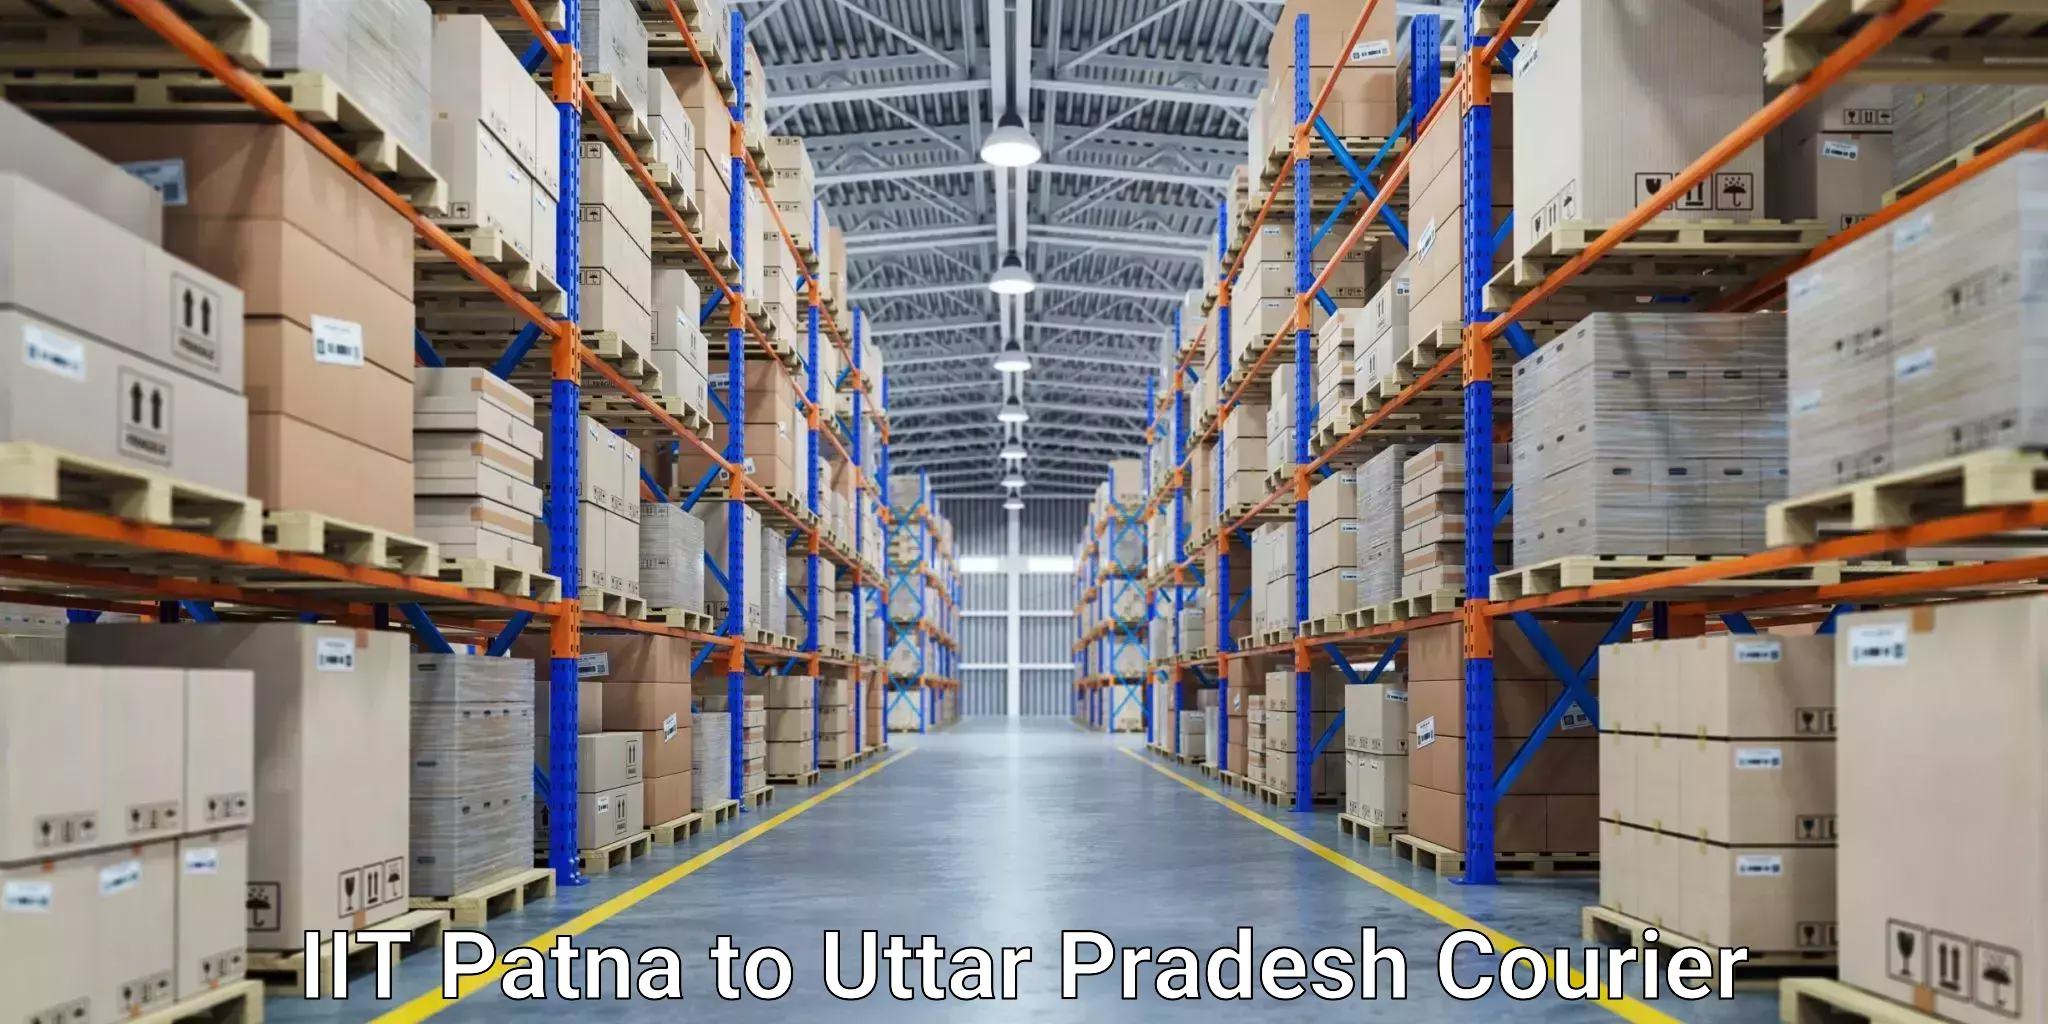 Comprehensive shipping network in IIT Patna to Sirathu